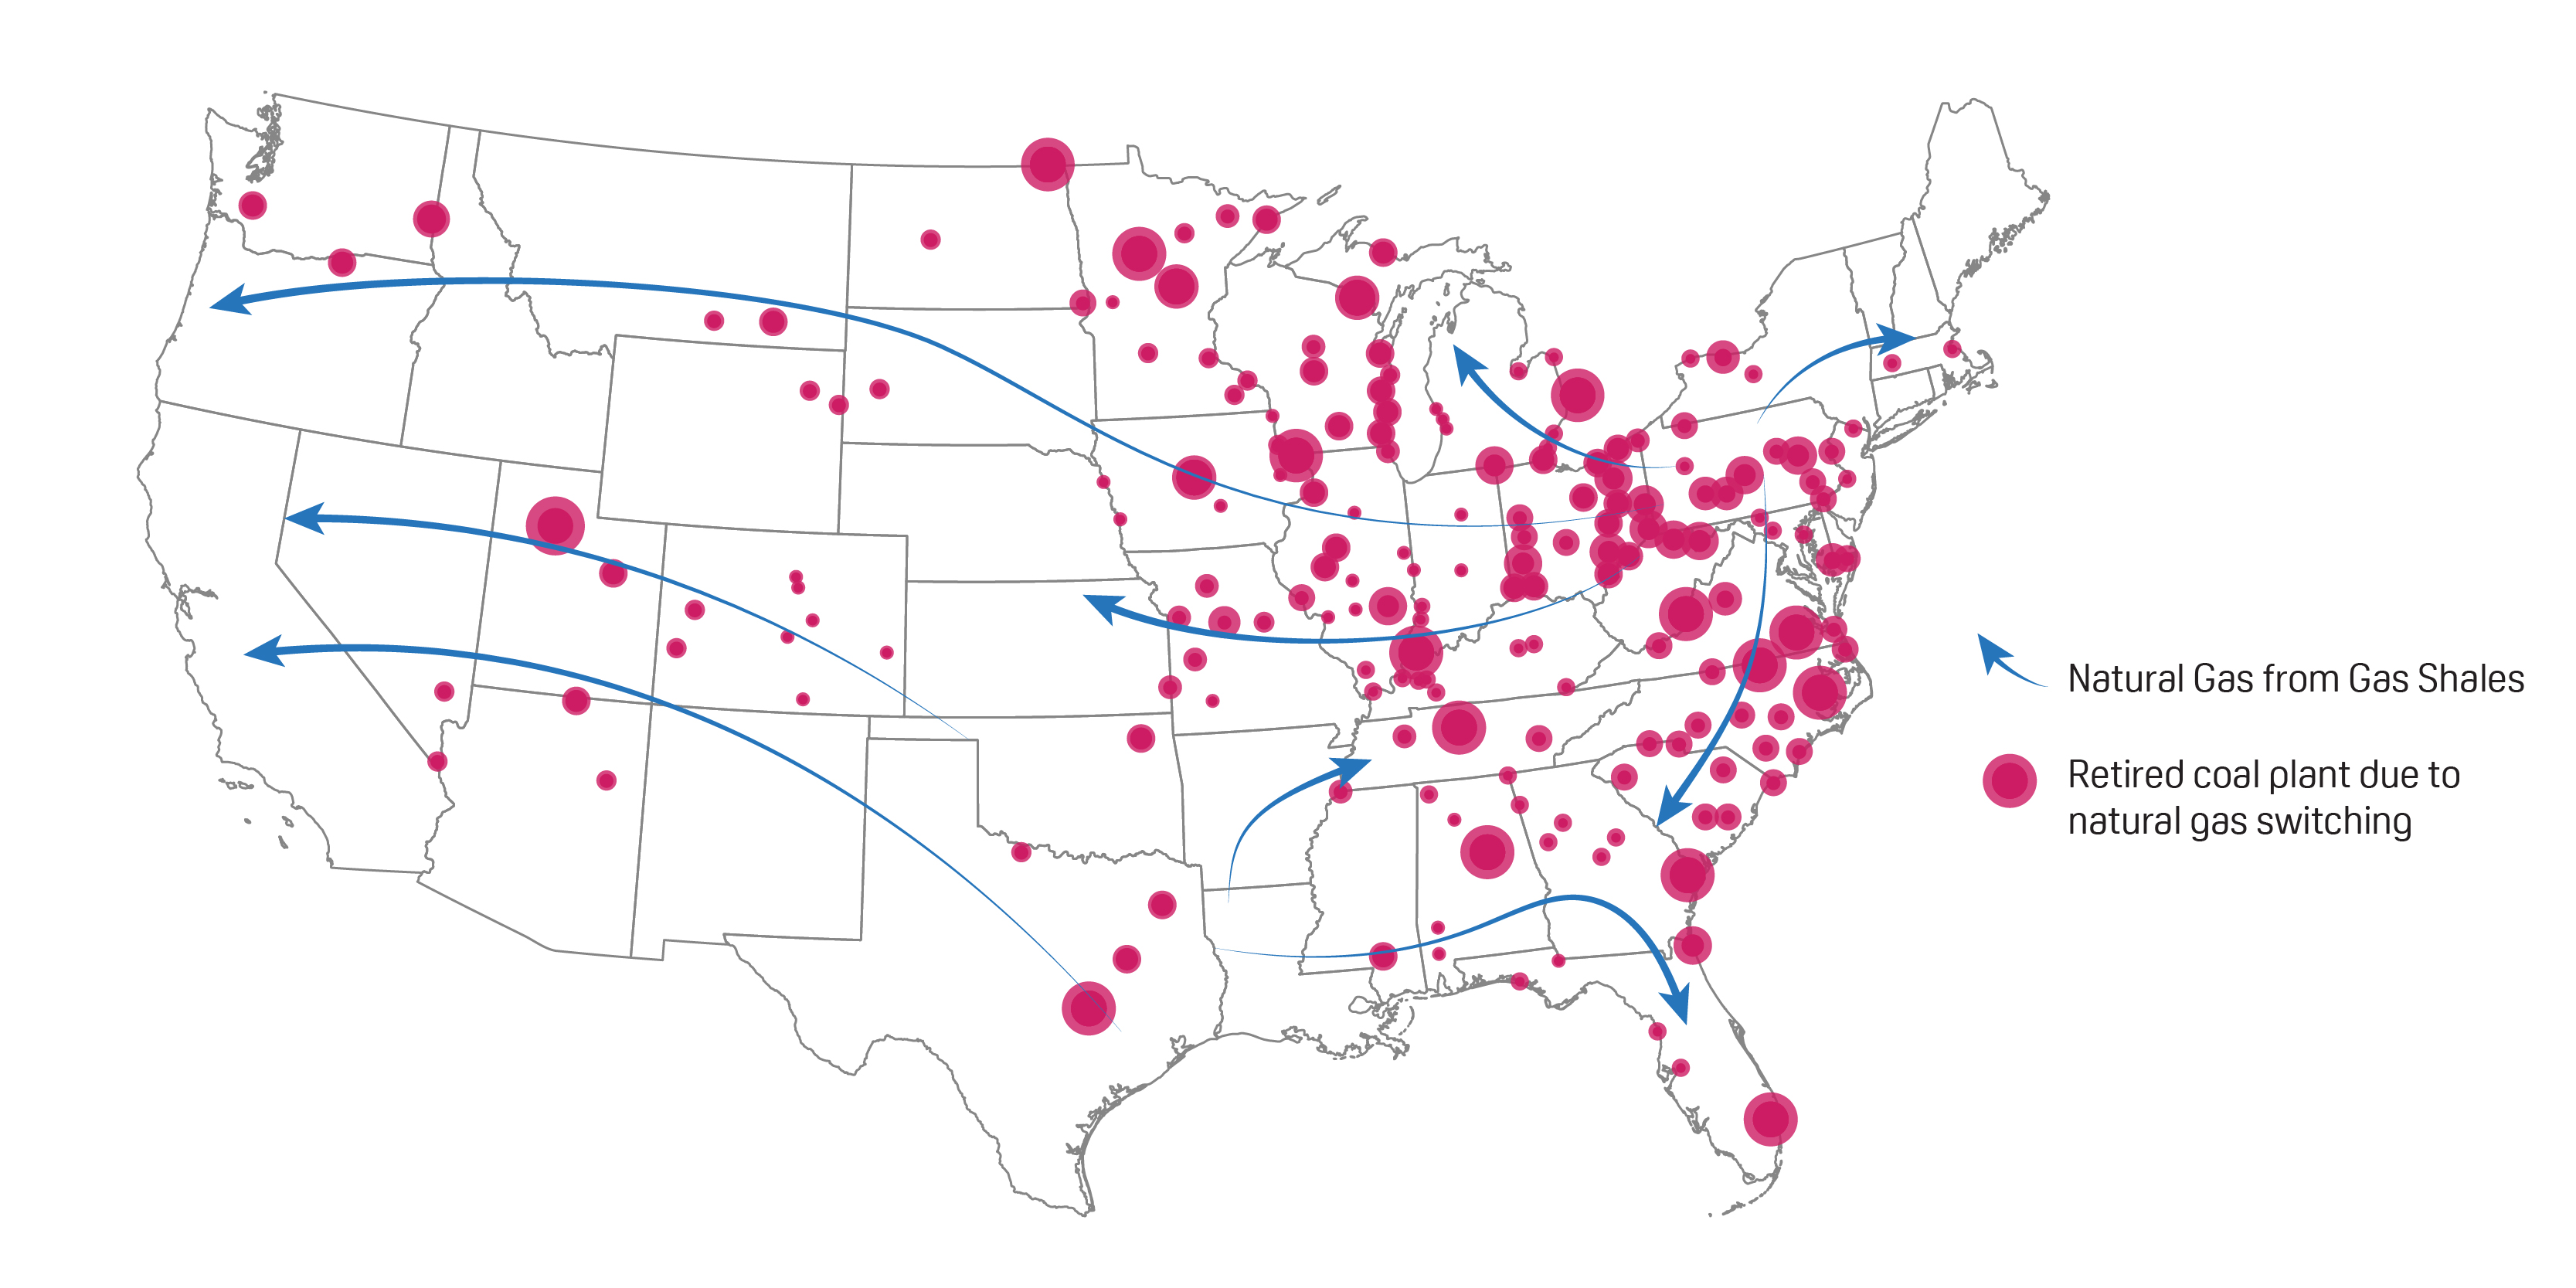 Map showing coal plants that have been retired in the United States due to natural gas switching from 2005-2020. Locations are shown with pink dots and are concentrated in the midwest, east coast, and south east, with a few locations in the central U.S., and north east. 